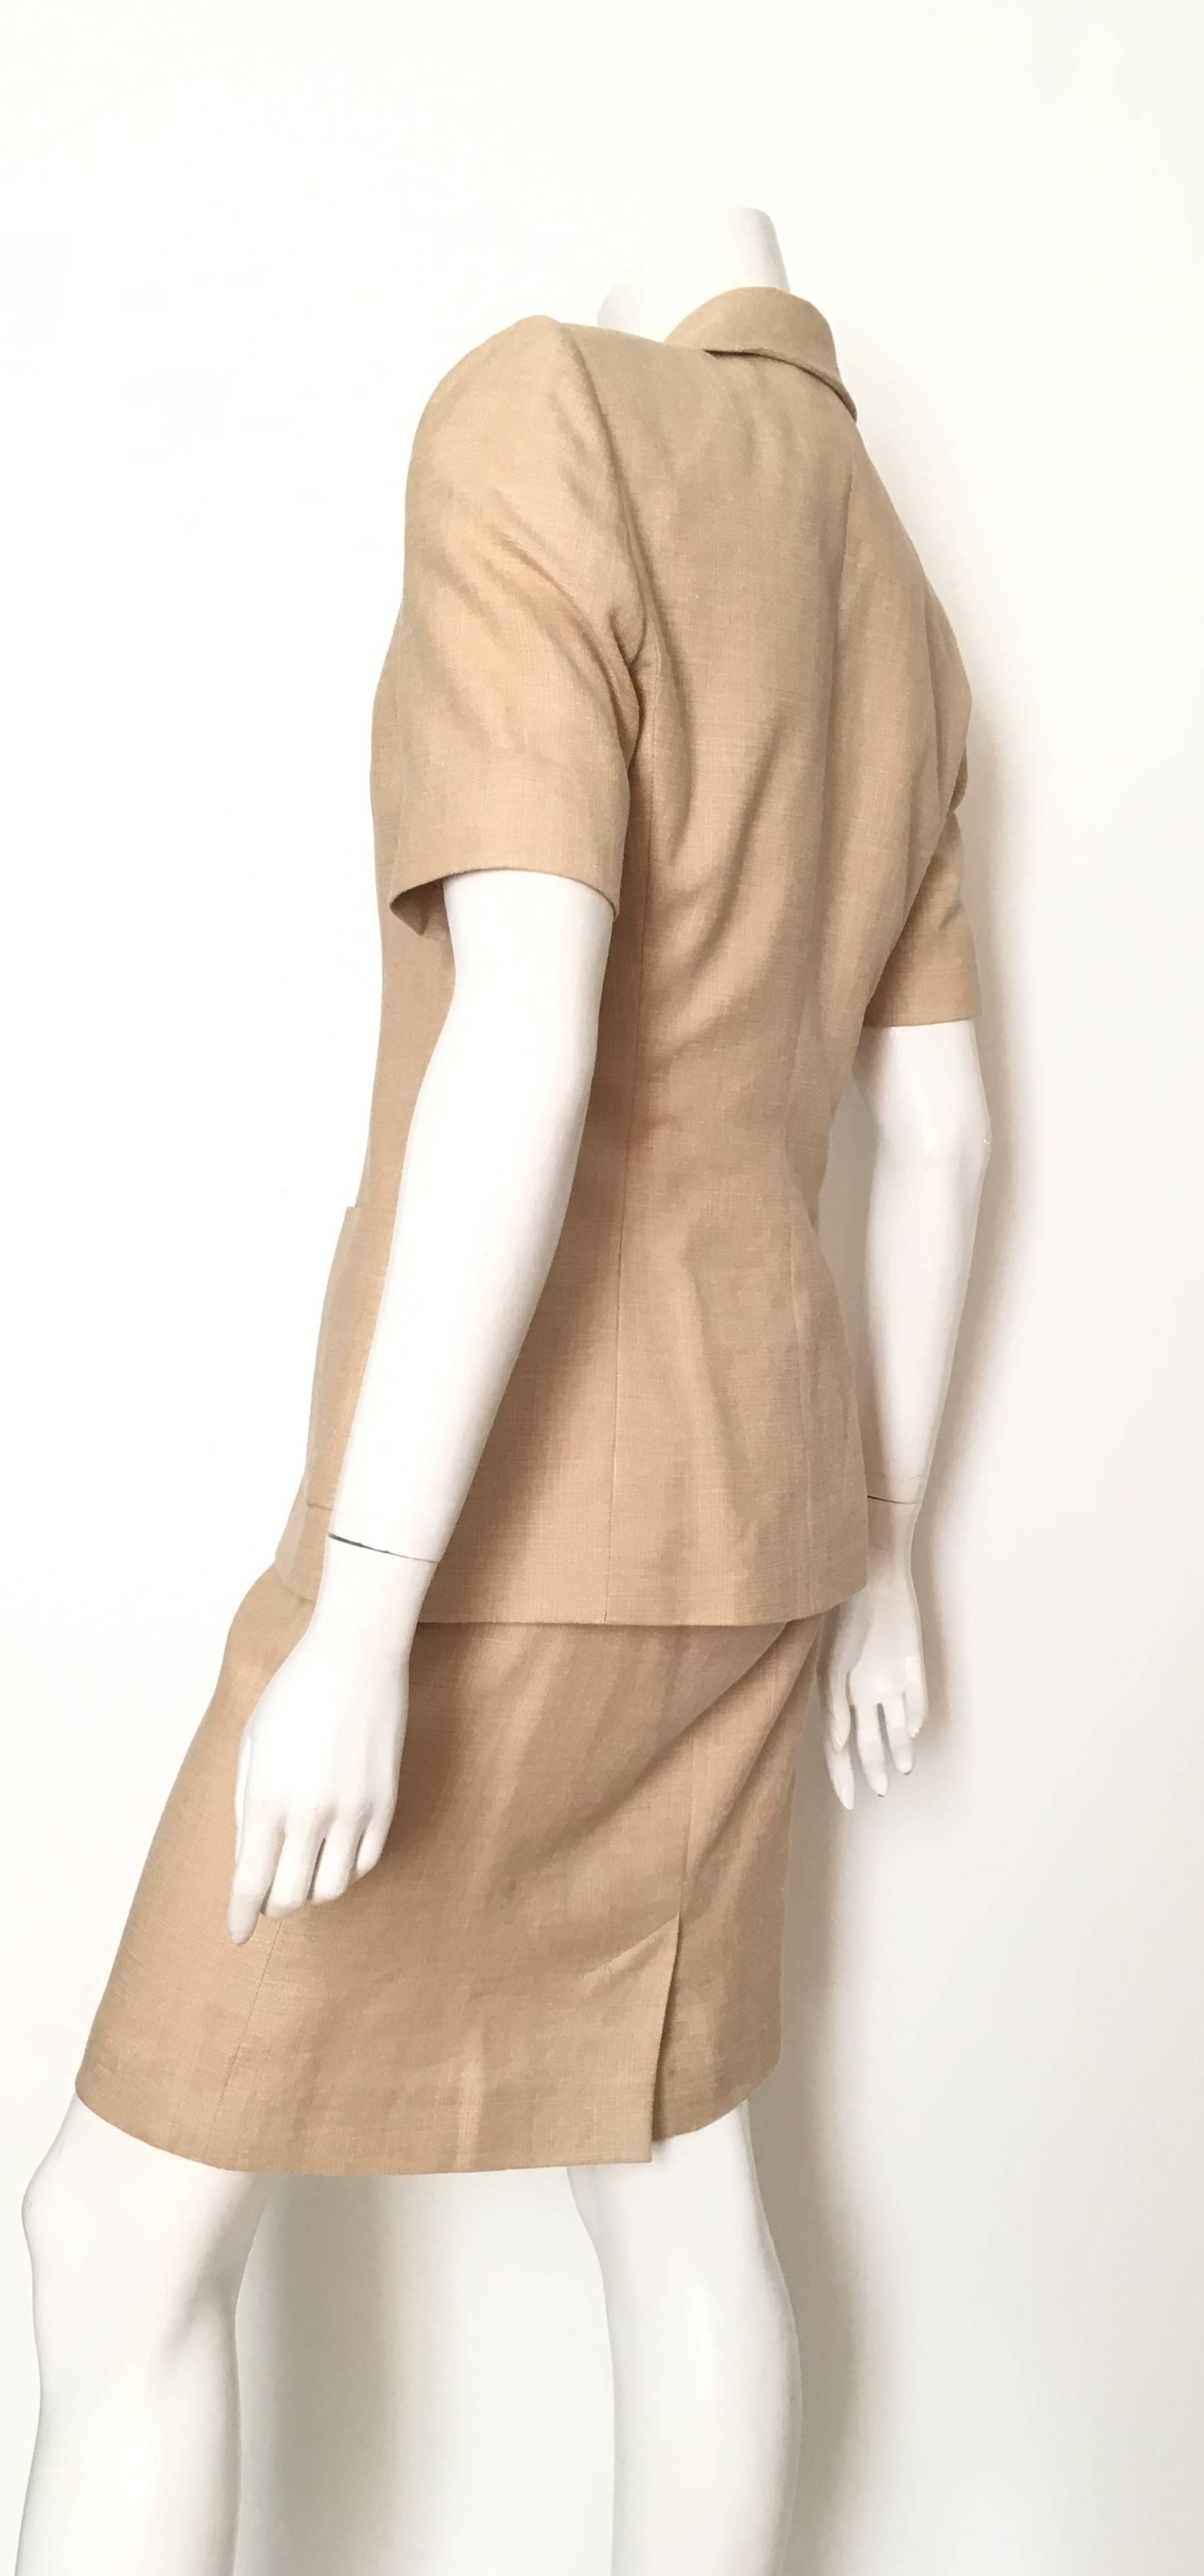 Givenchy Couture 1990s Tan Jacket & Skirt Set Size 6. 1